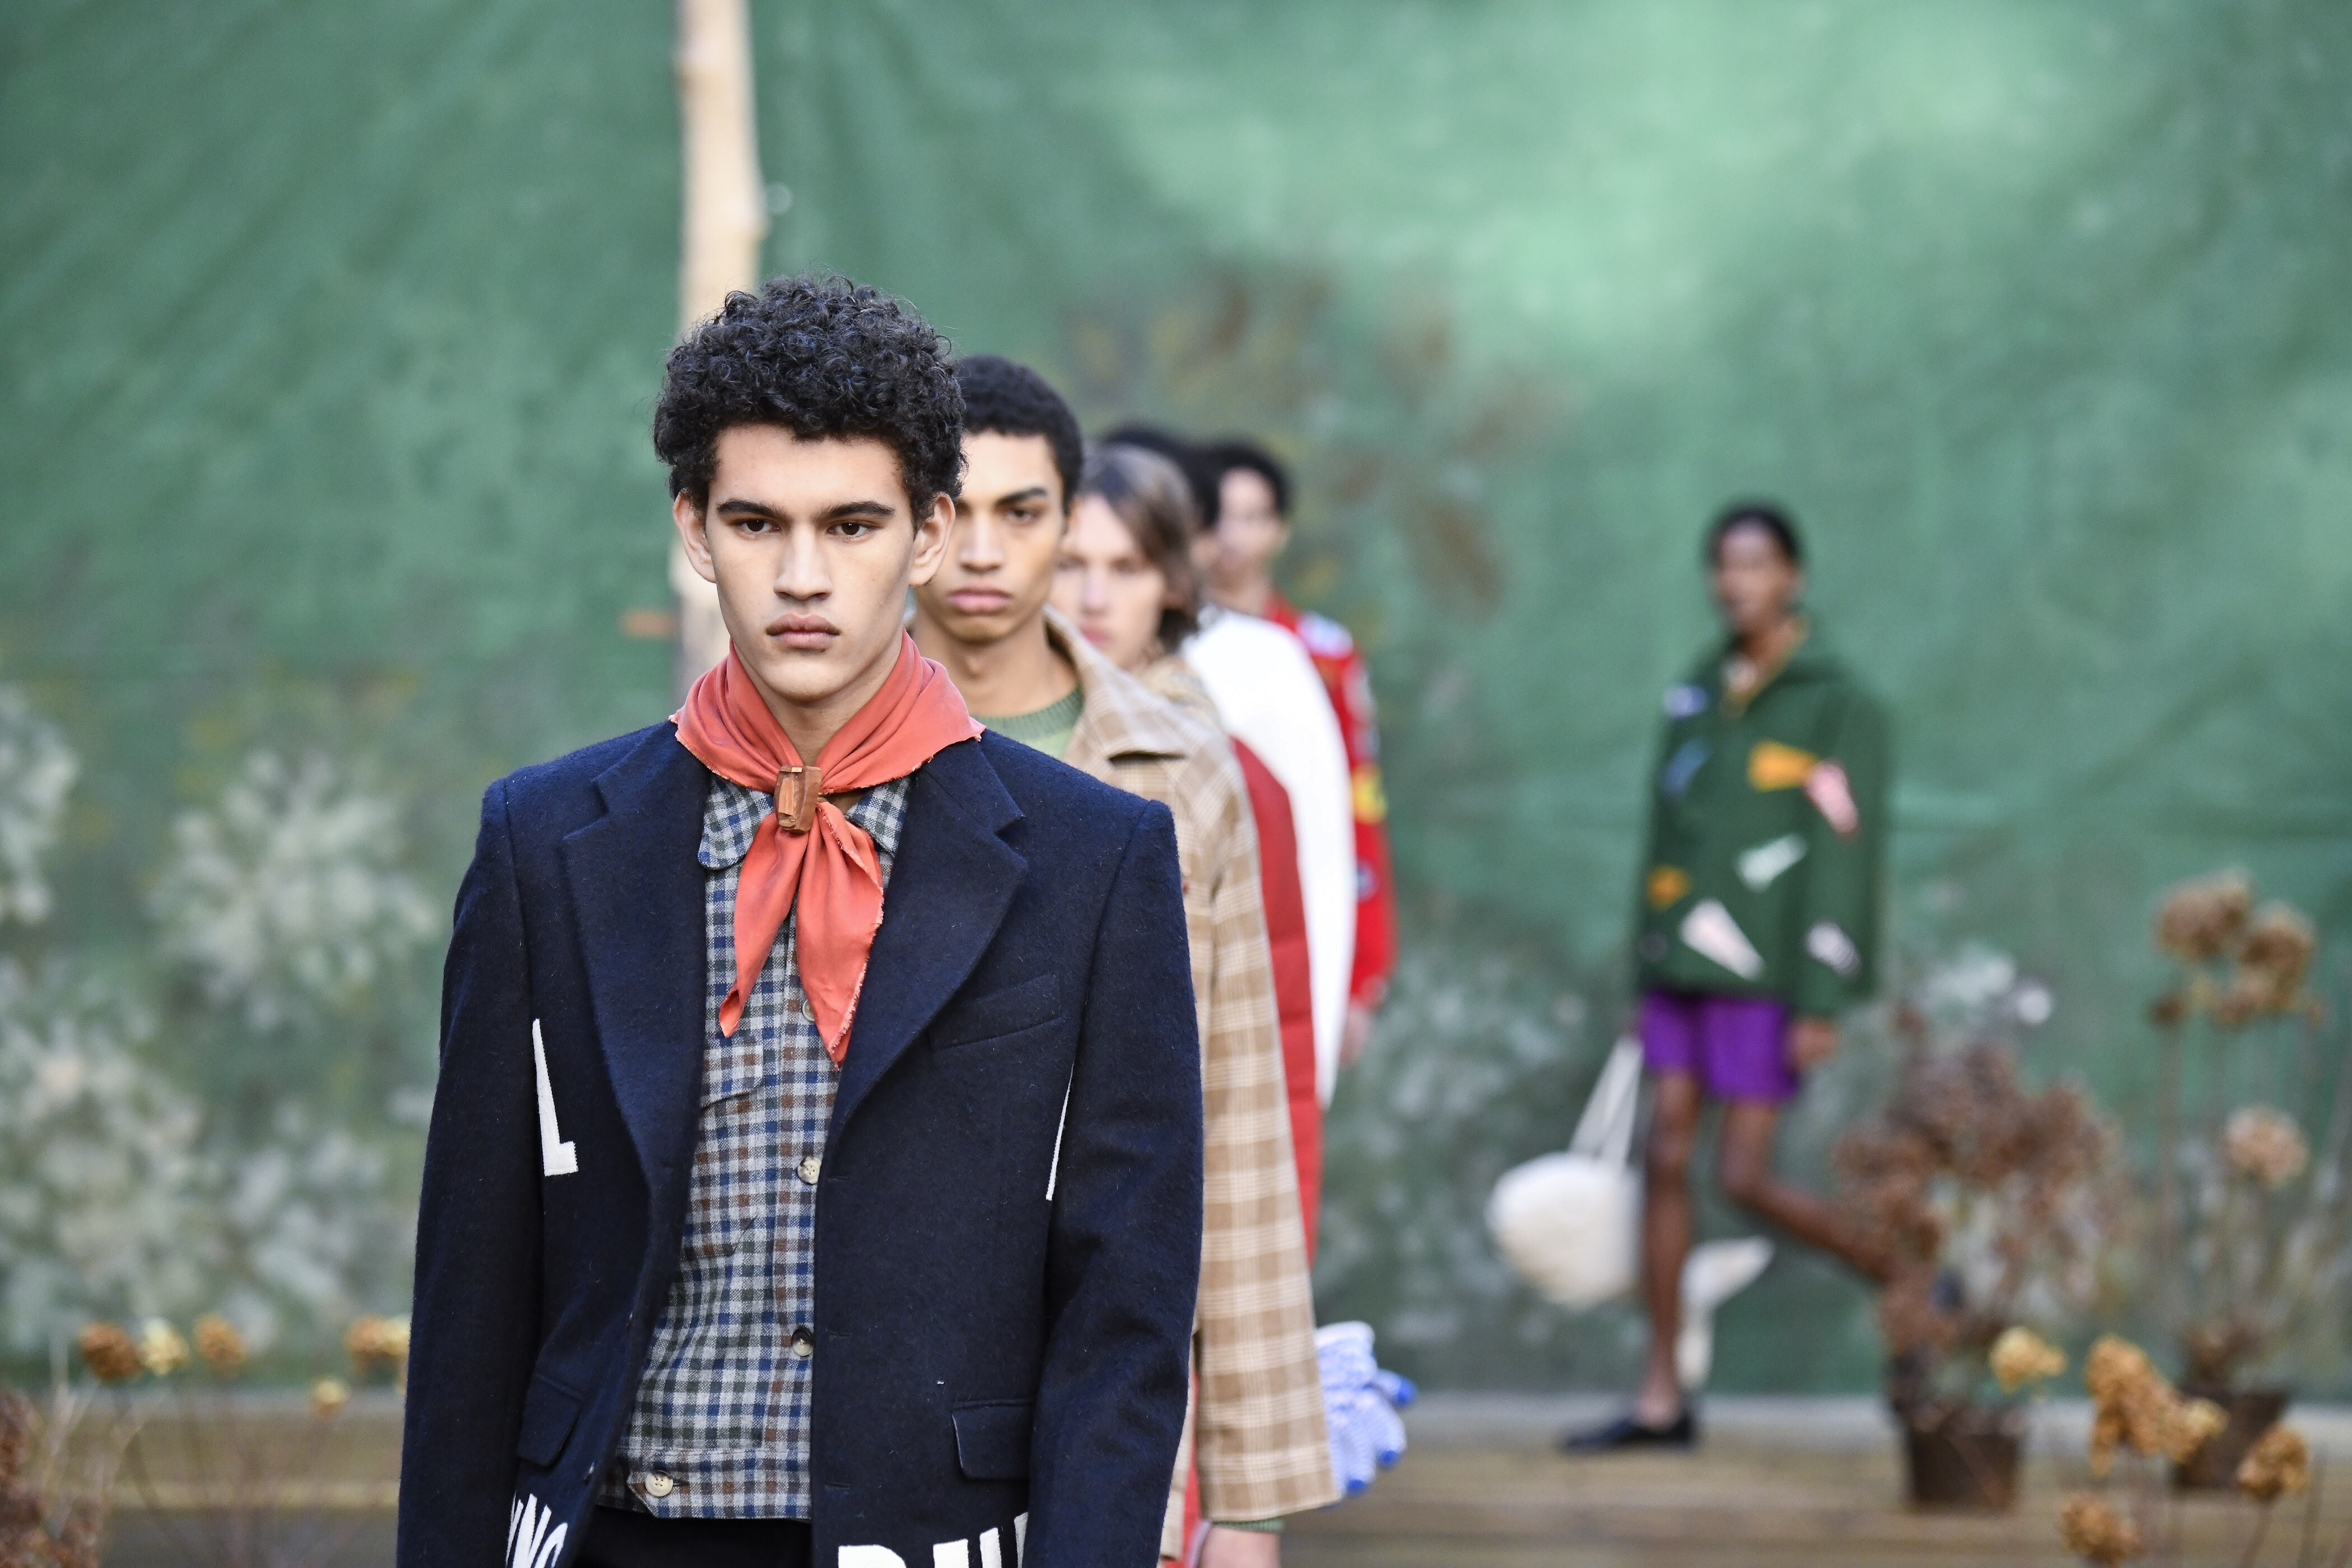 Bode’s autumn/winter menswear collection was shown at Paris Fashion Week in January. Photo: Victor Virgile/Gamma-Rapho via Getty Images